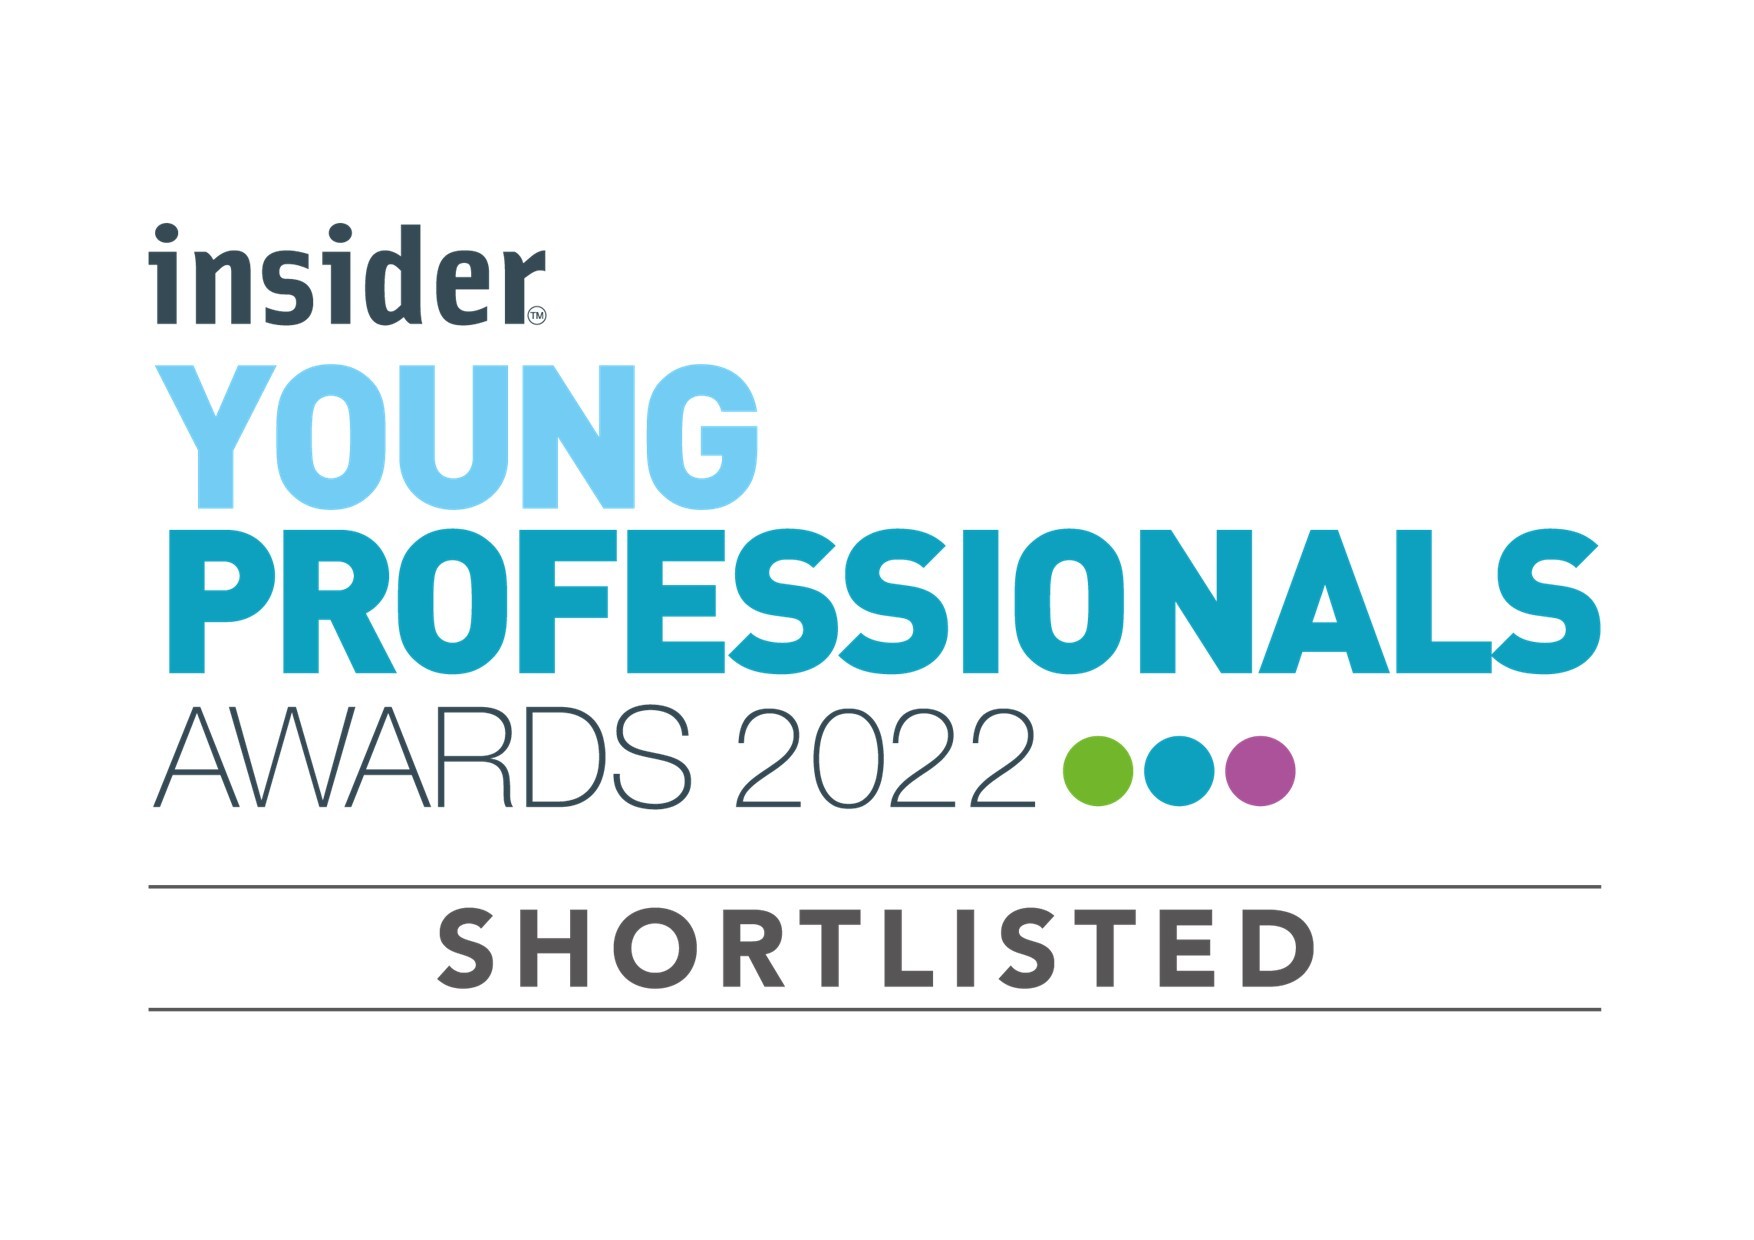 Insider Young Professionals Award 22 - shortlisted